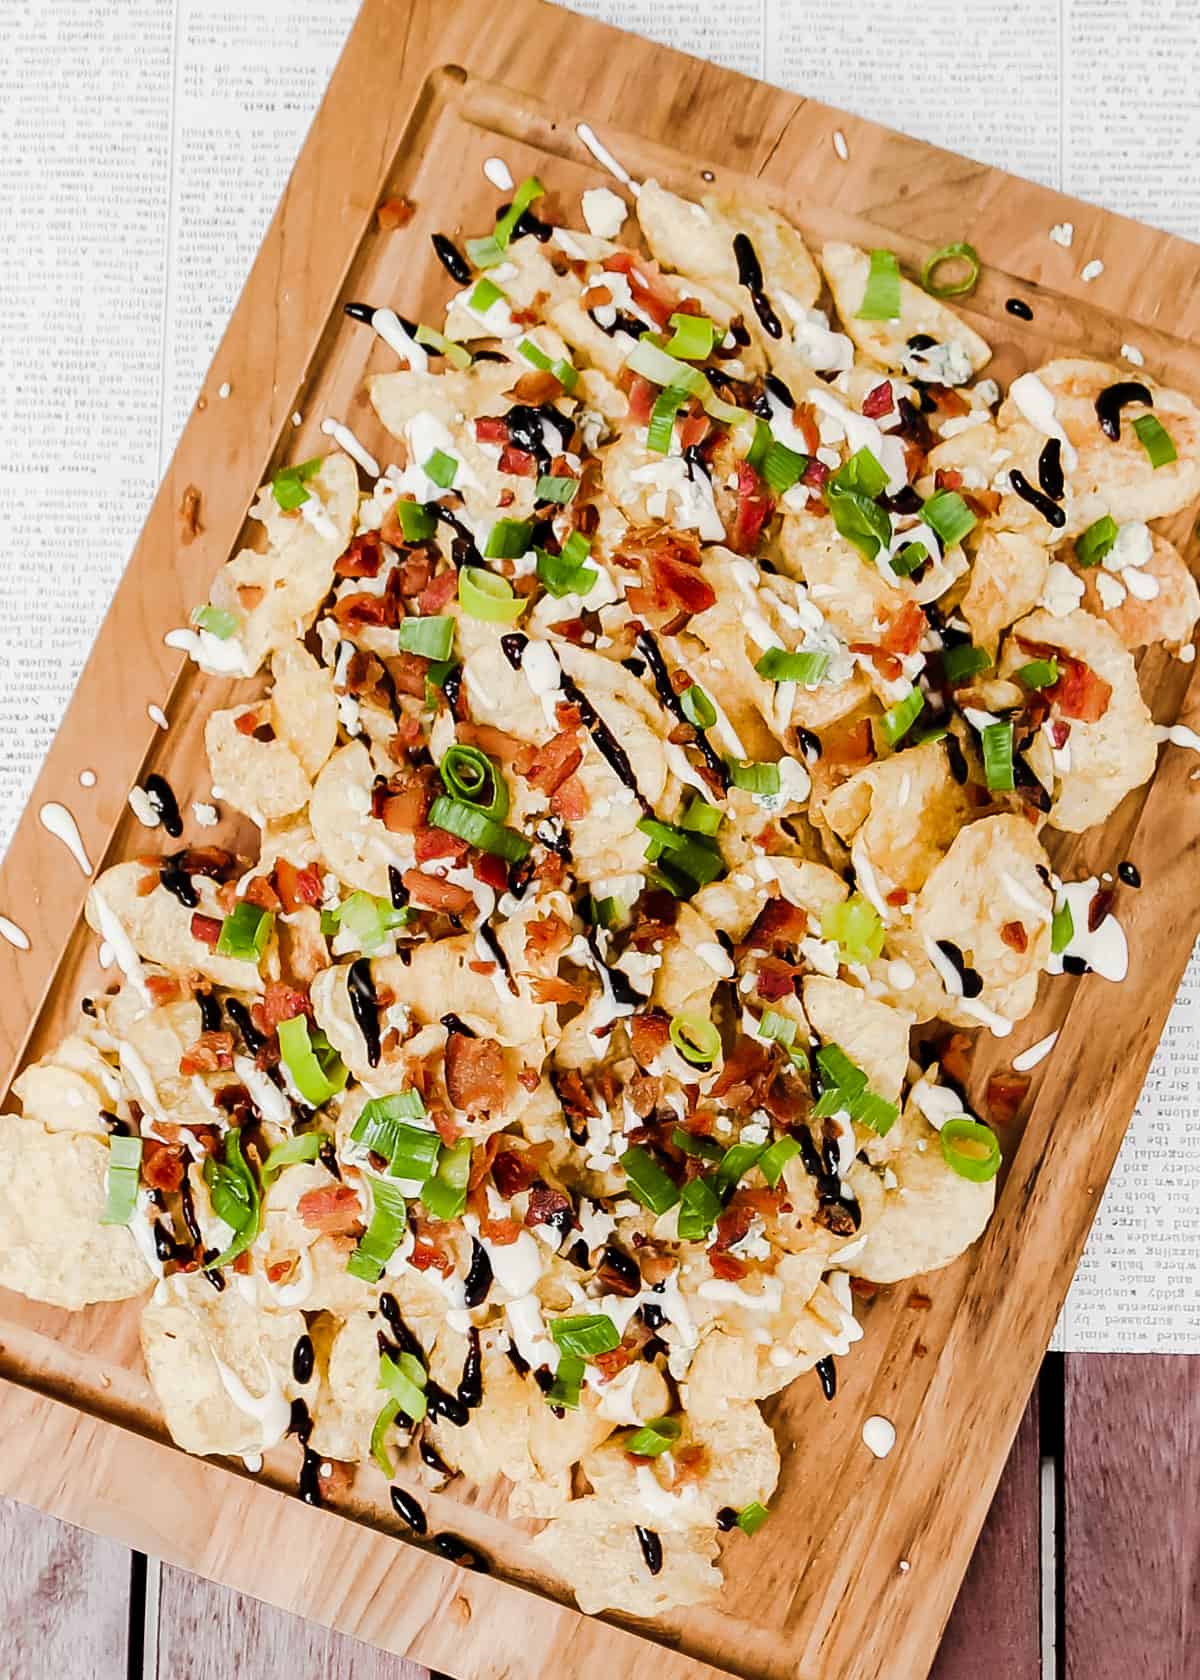 piles of potato chips topped with bacon, green onion, white sauce and balsamic glaze, on wood serving board.